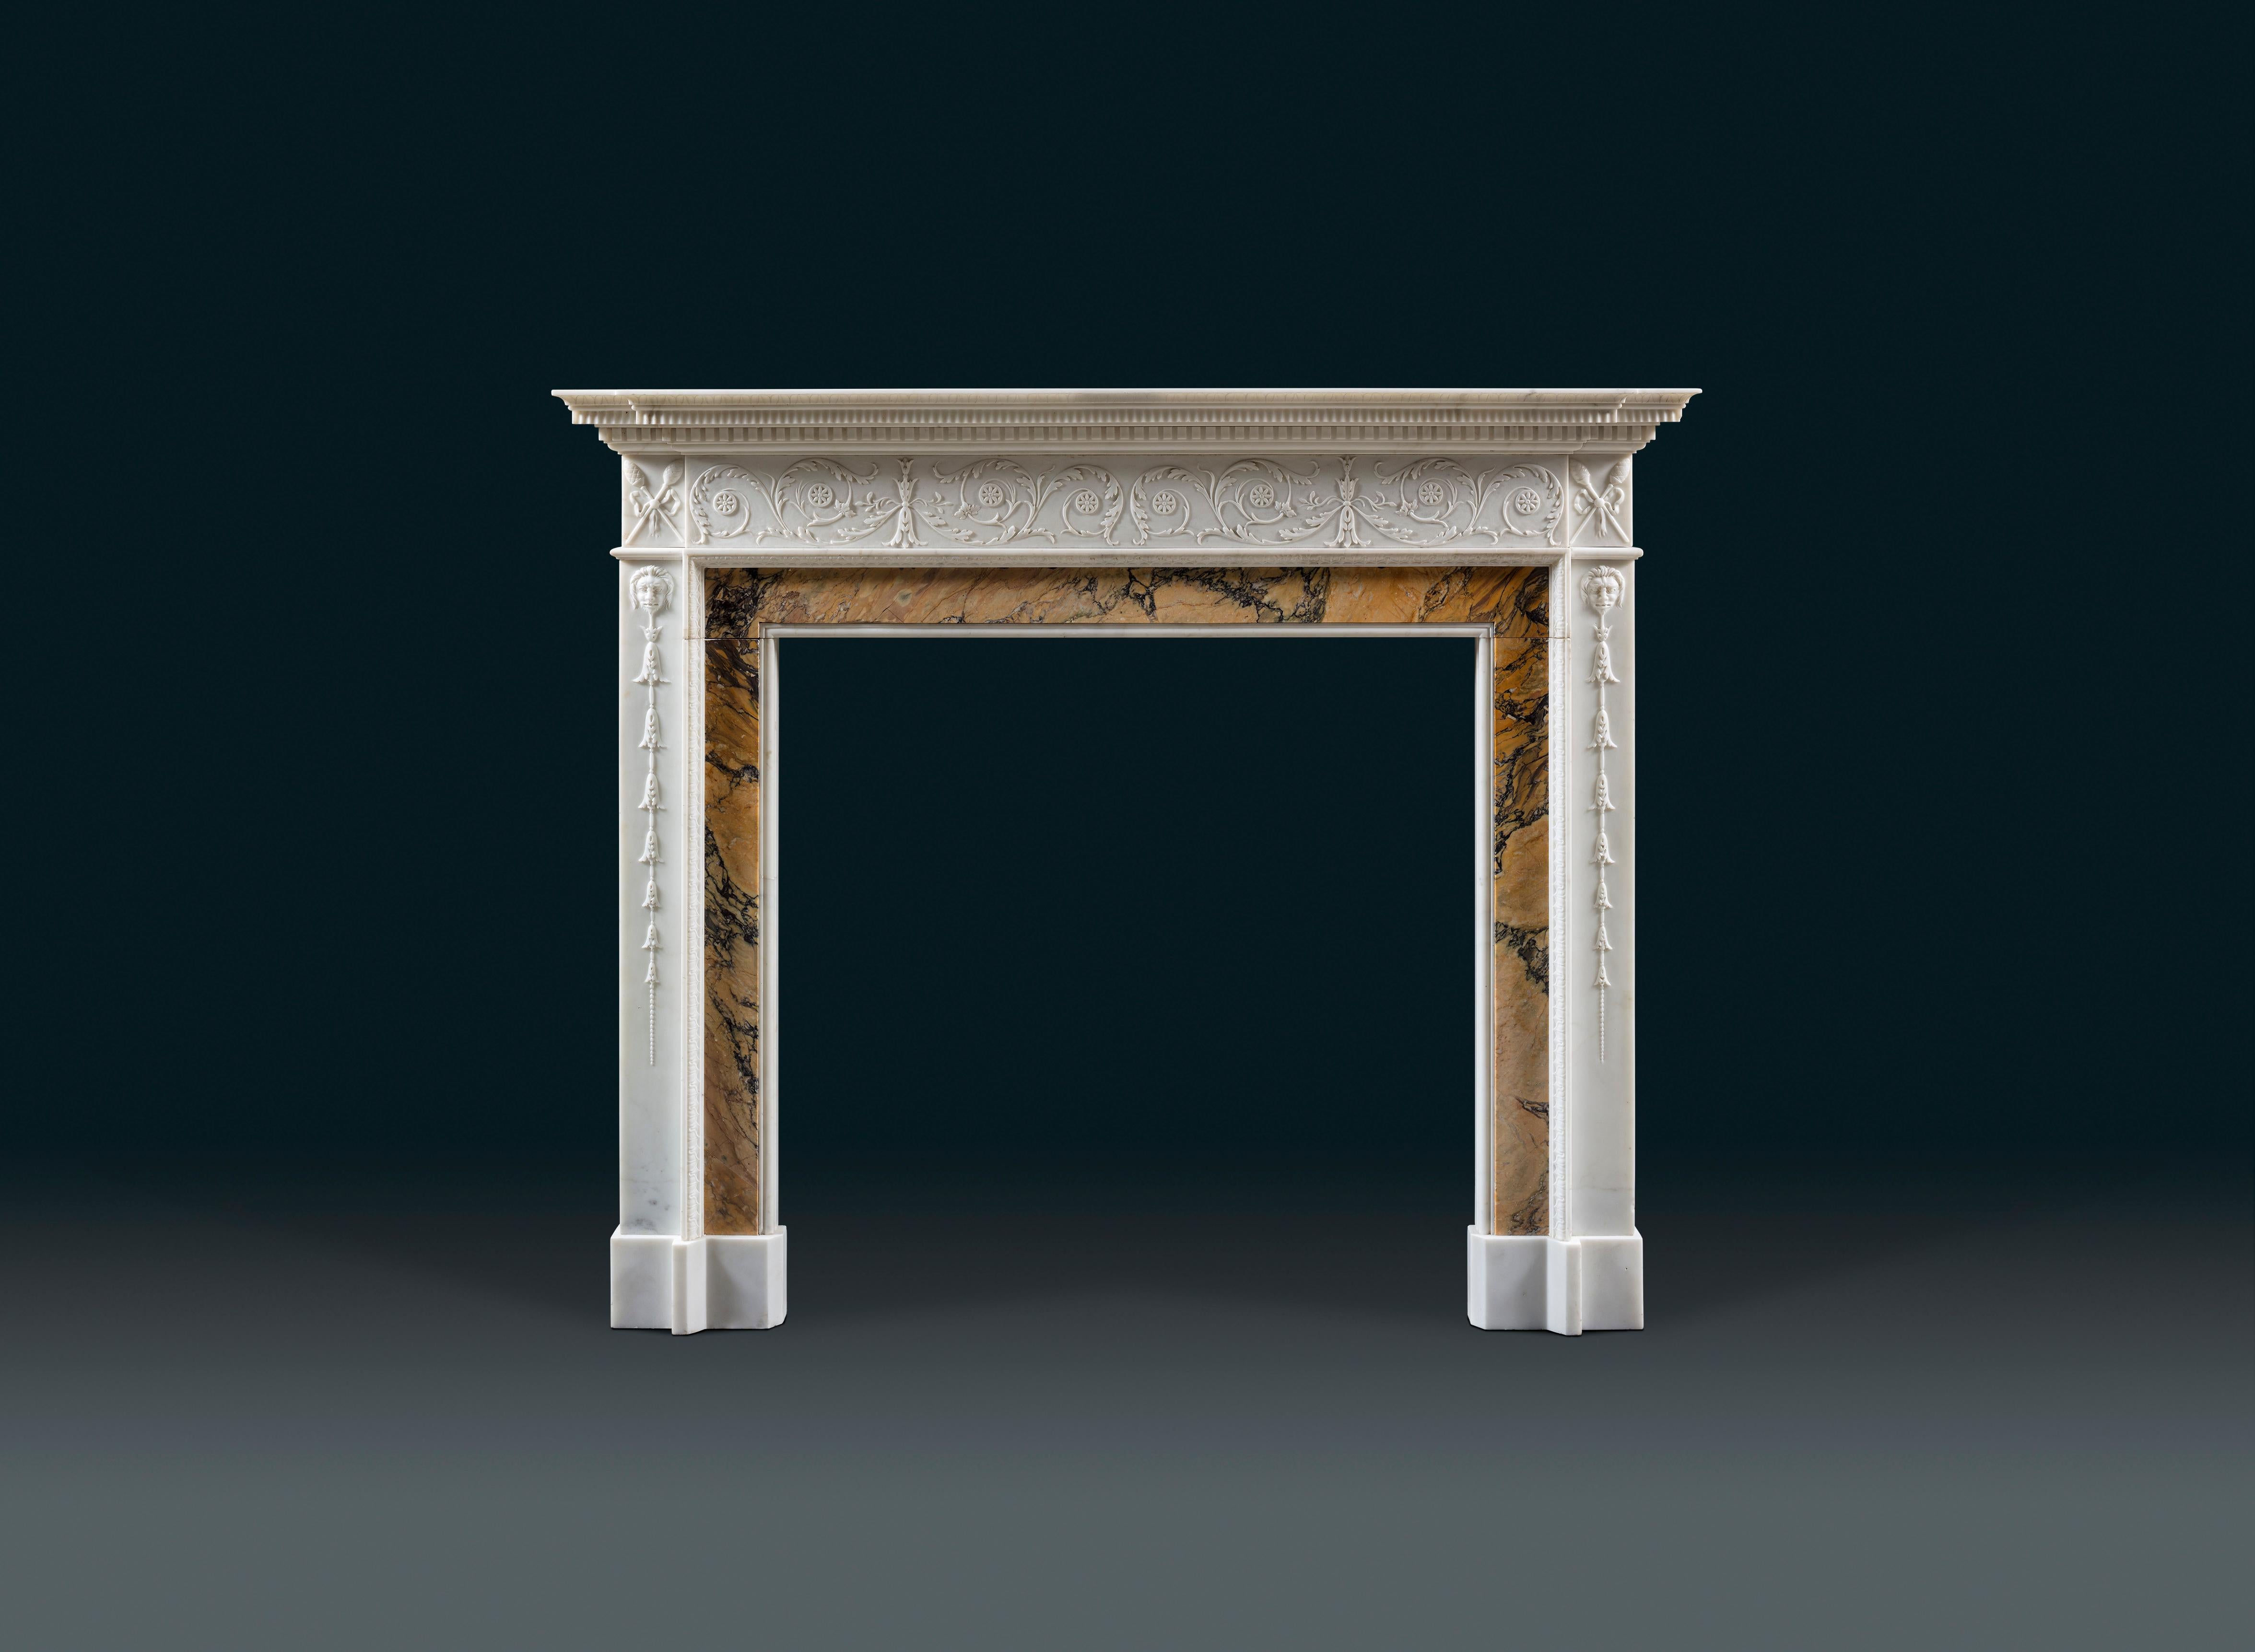 A finely carved 19th century Georgian style chimneypiece in Statuary marble and high quality Siena veneers.
The central frieze is carved with ornamental foliage in arabesque style, ending in two pairs of thyrsus in the cornerblocks. Bell flower